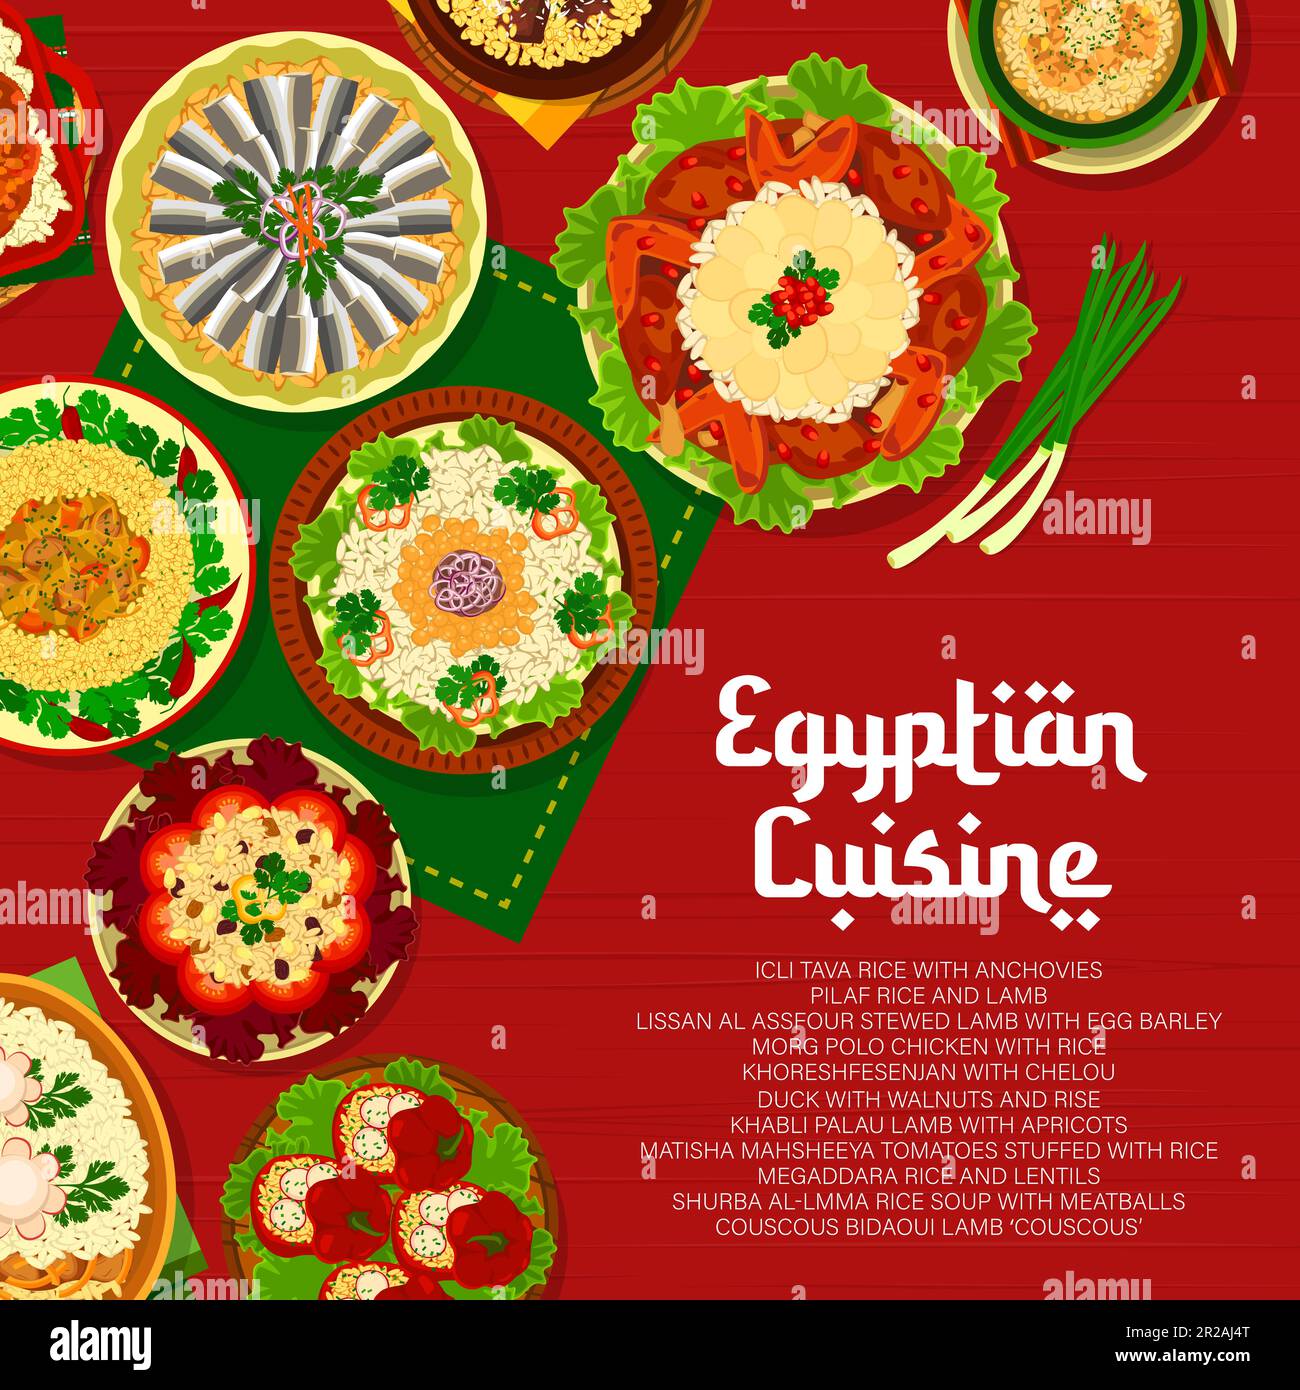 Egyptian cuisine menu cover, Egypt food dishes and meals, vector restaurant poster. Egyptian cuisine traditional food of couscous barley, pilaf rice with lamb and chicken, lentils and anchovy Stock Vector